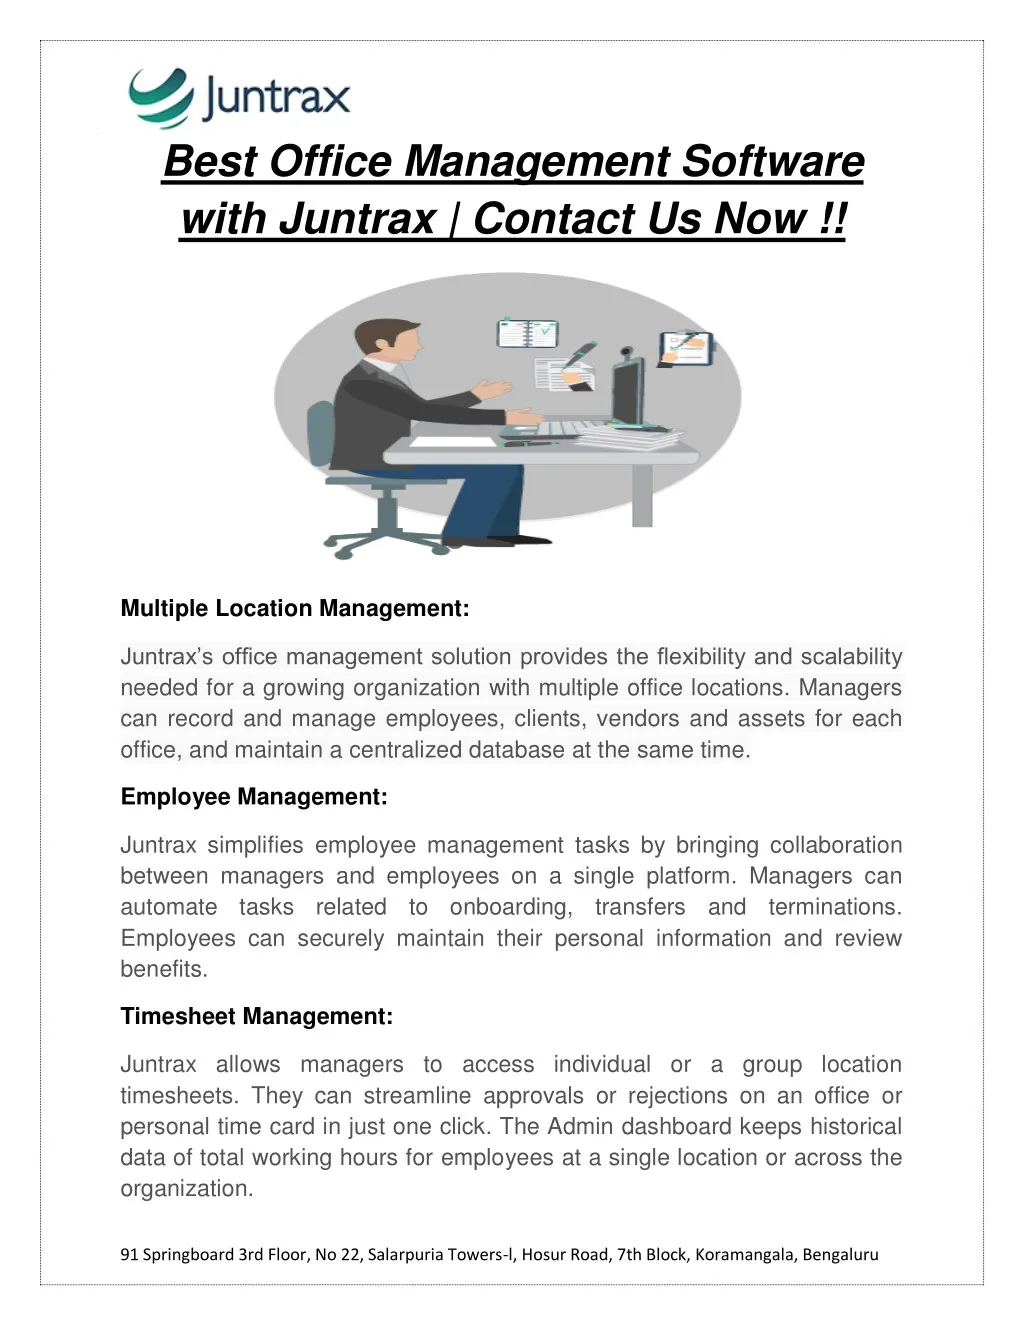 best office management software with juntrax